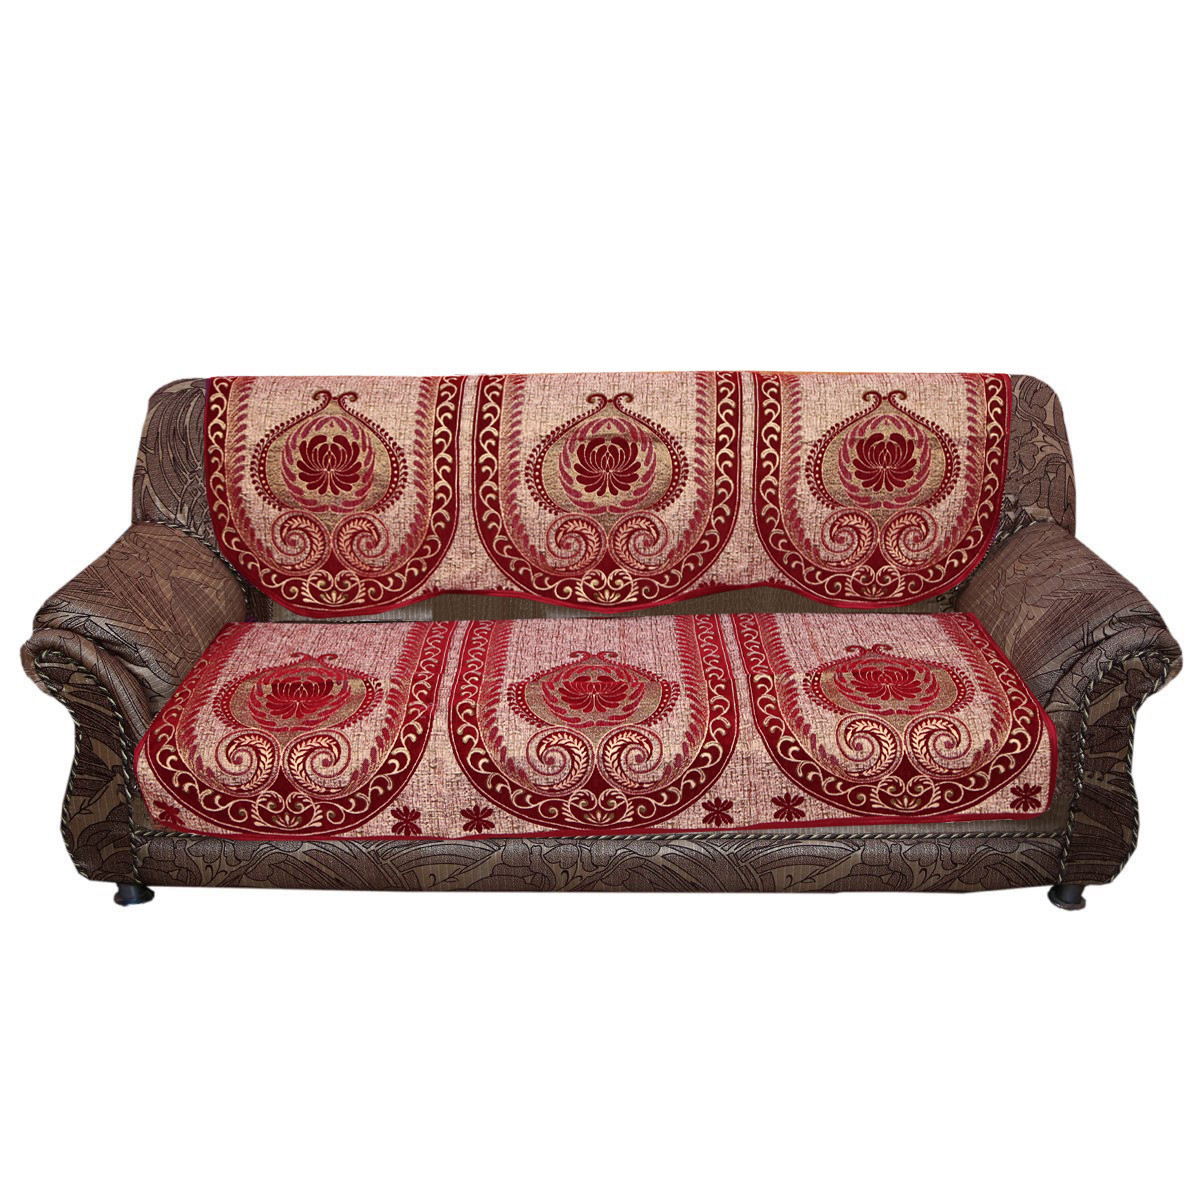 Kuber Industries Luxurious Cotton Damask Design 5 Seater Sofa Cover Set for Living Room (Red)